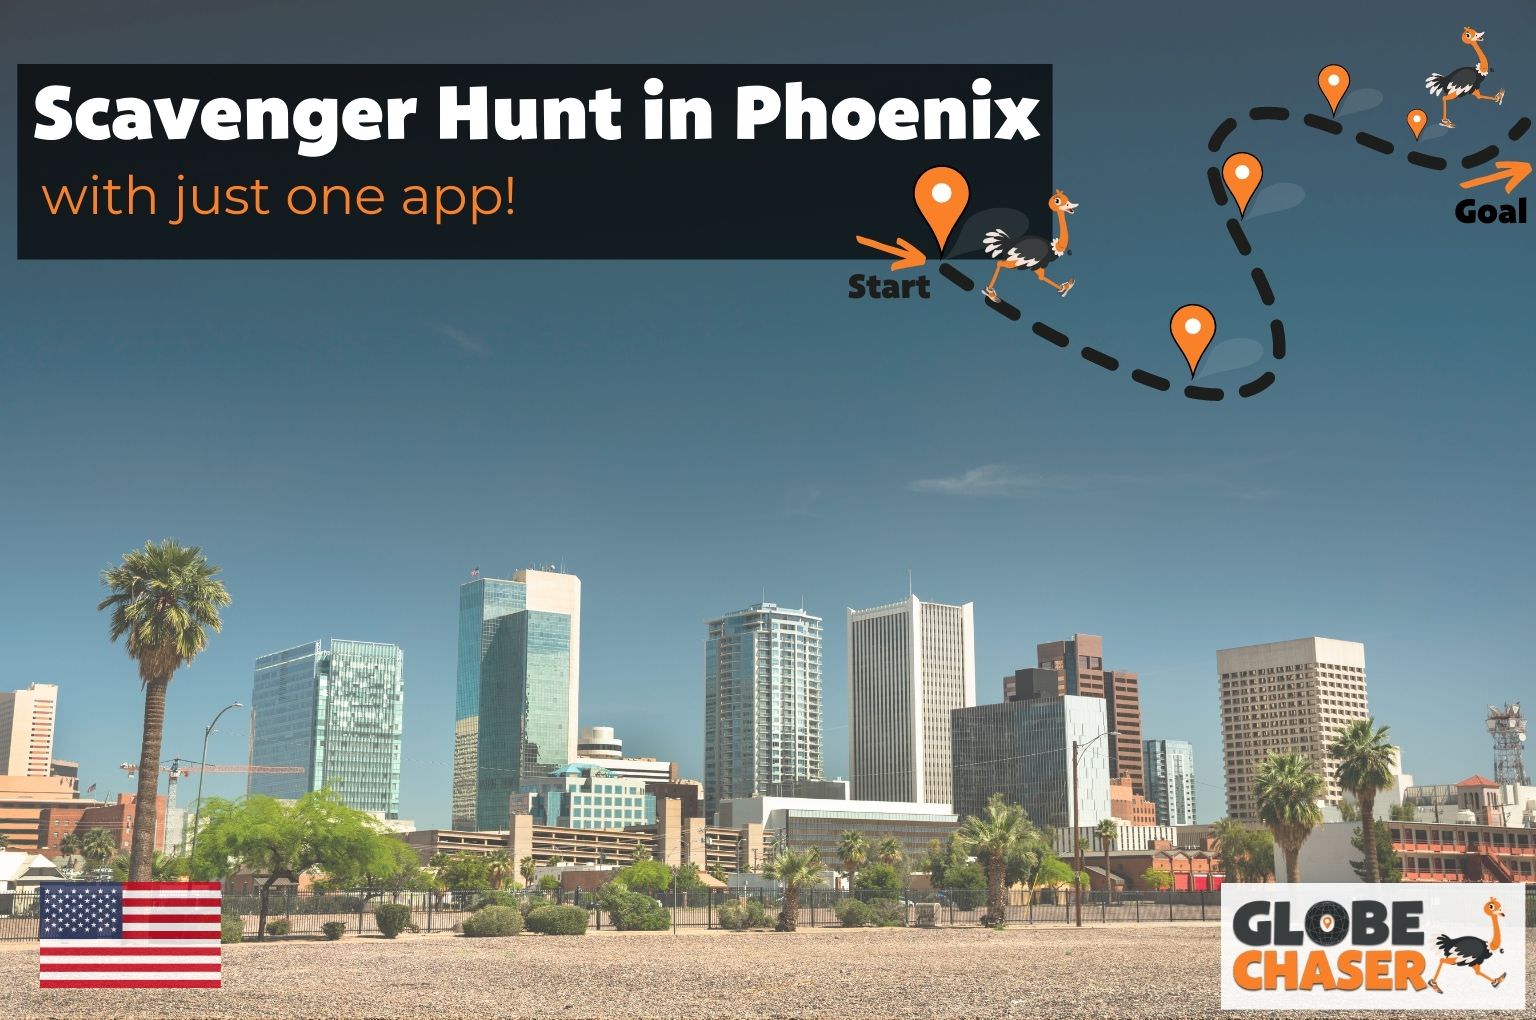 Scavenger Hunt in Phoenix, USA - Family Activities with the Globe Chaser App for Outdoor Fun